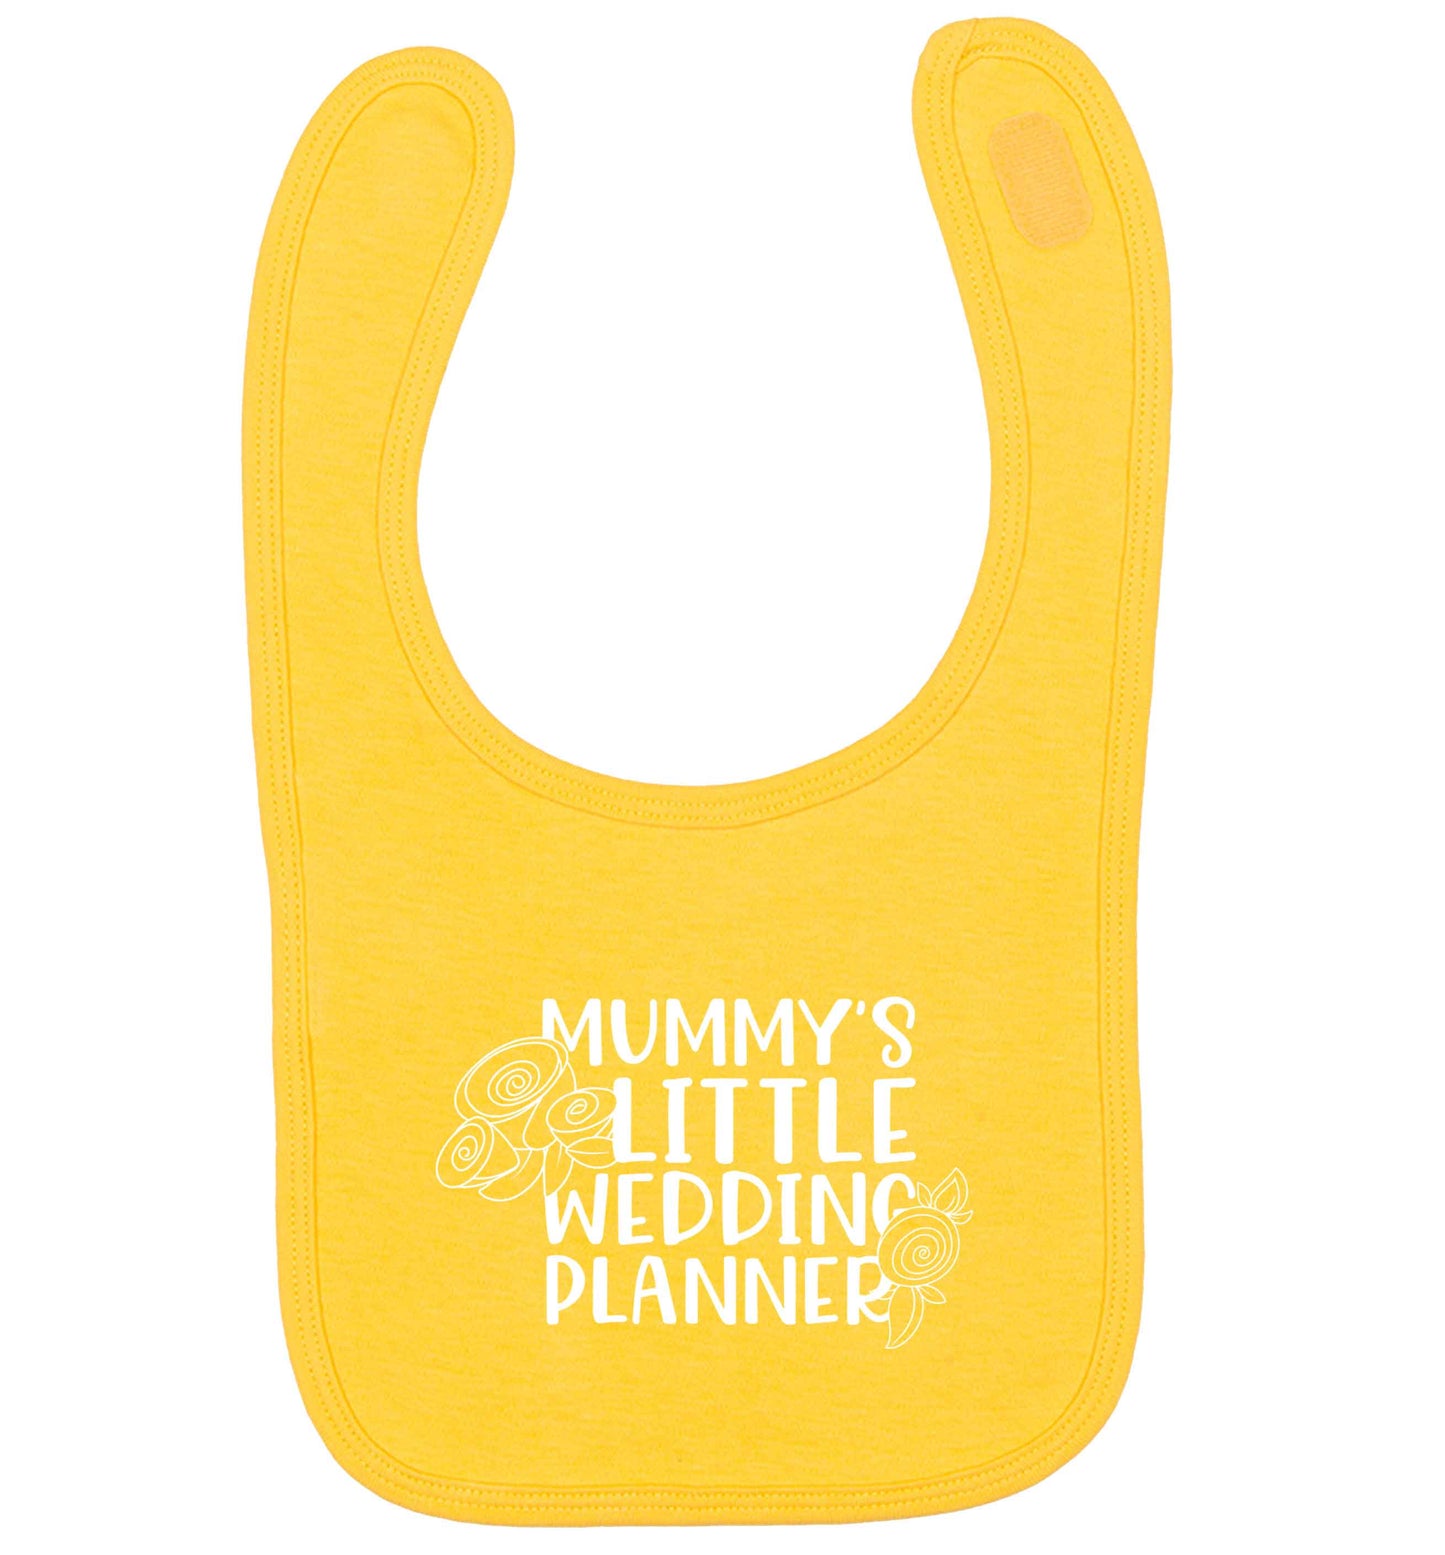 adorable wedding themed gifts for your mini wedding planner! yellow baby bib